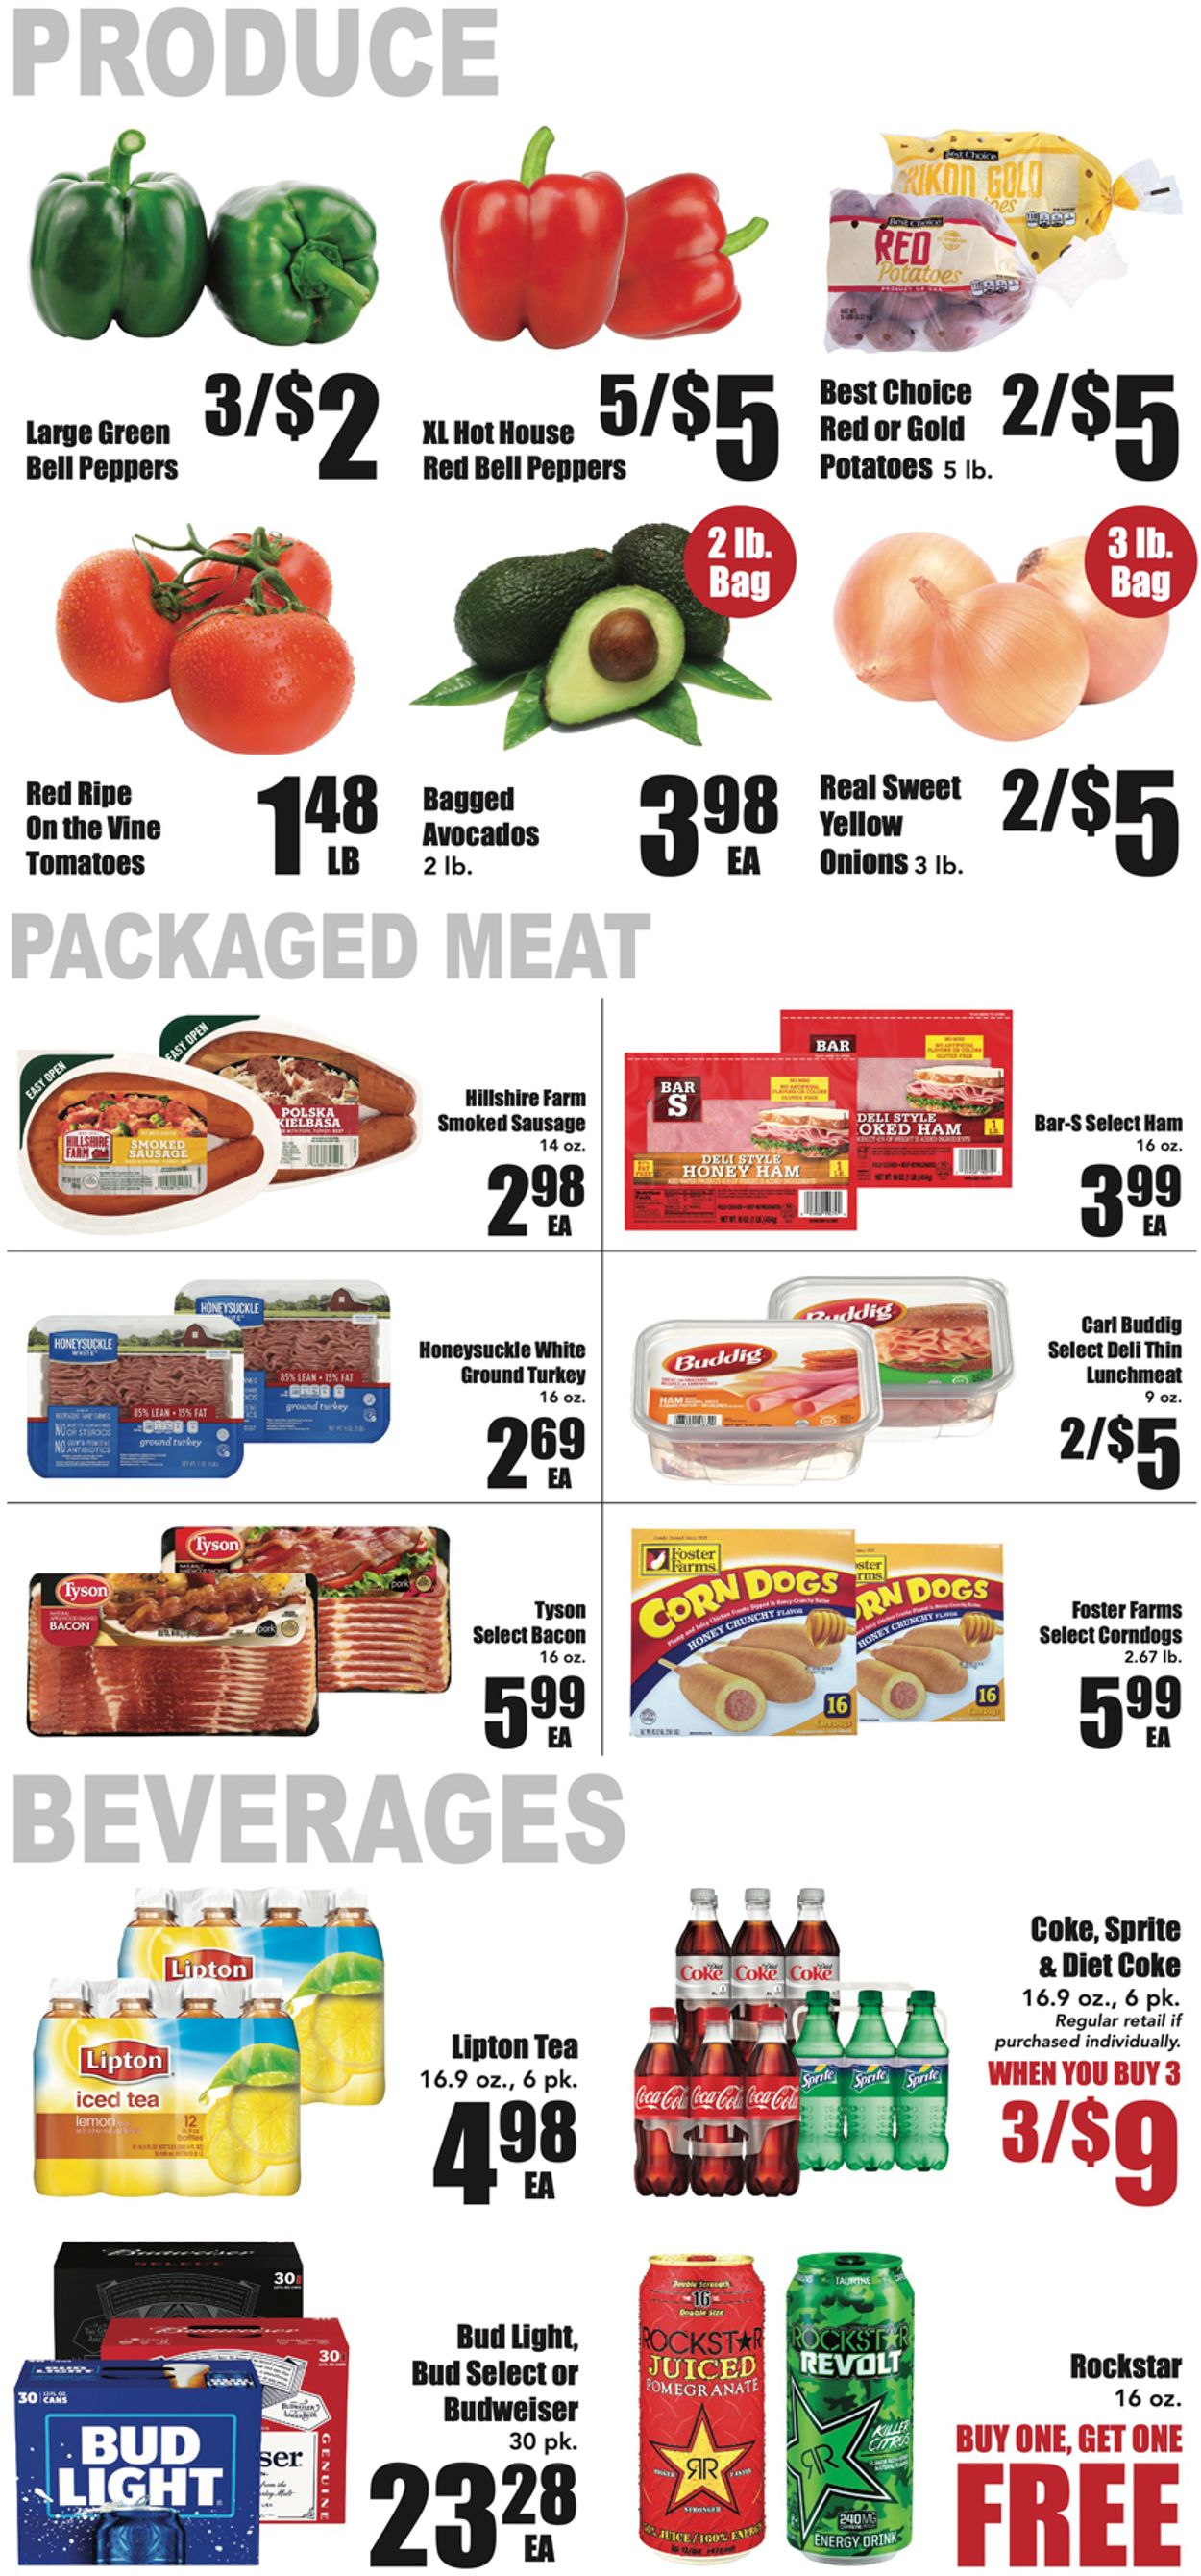 Warehouse Market Ad from 10/13/2021